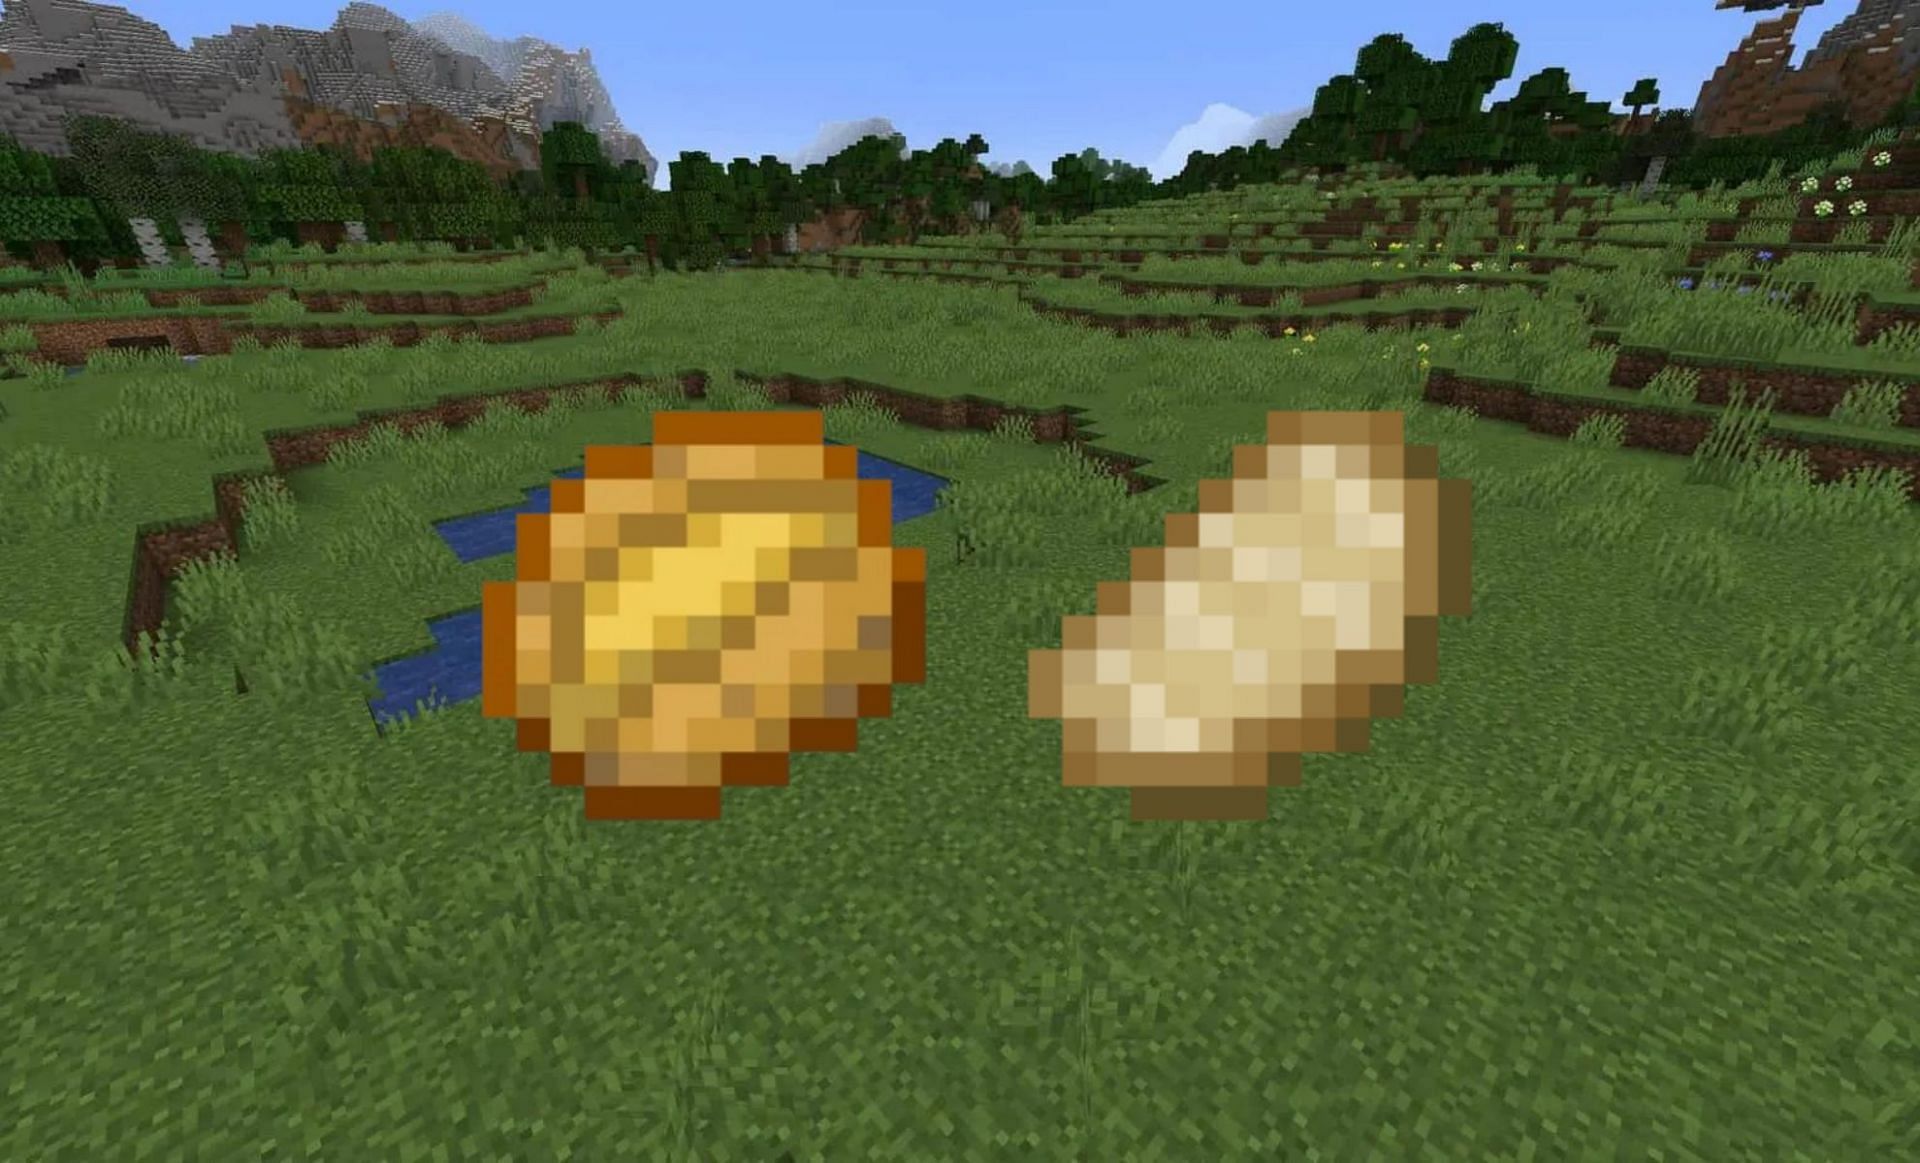 Food sources are vital in the game (Images via Minecraft Wiki)